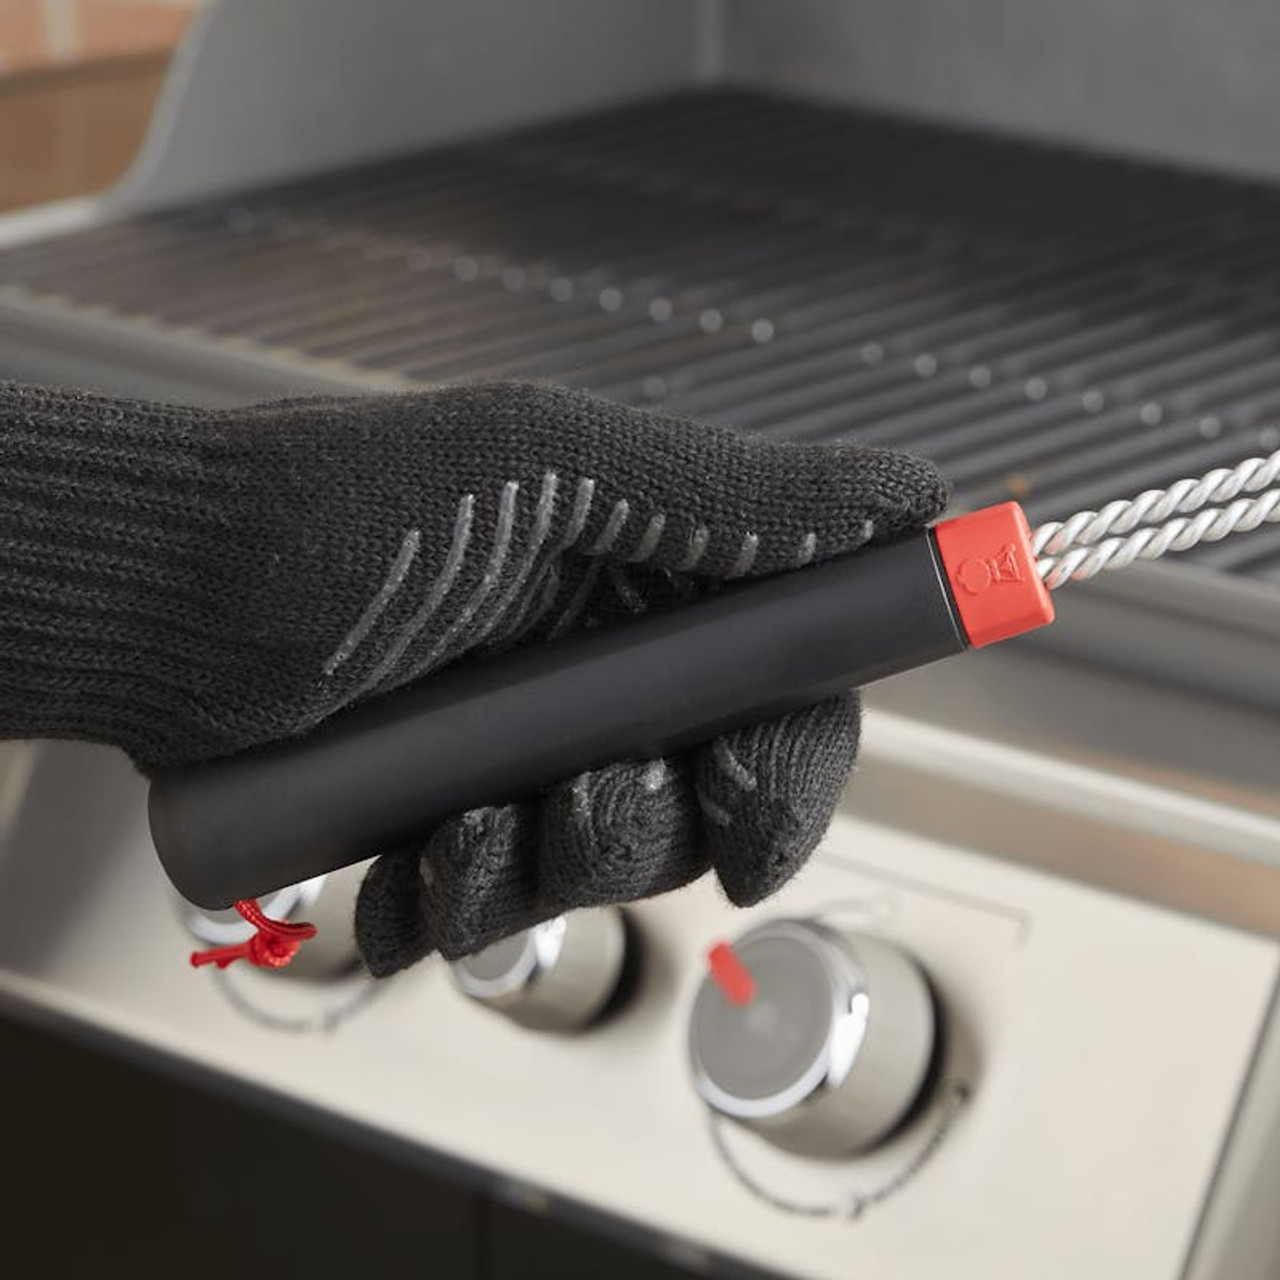 Weber Grills 12-Inch Three-Sided Grill Brush